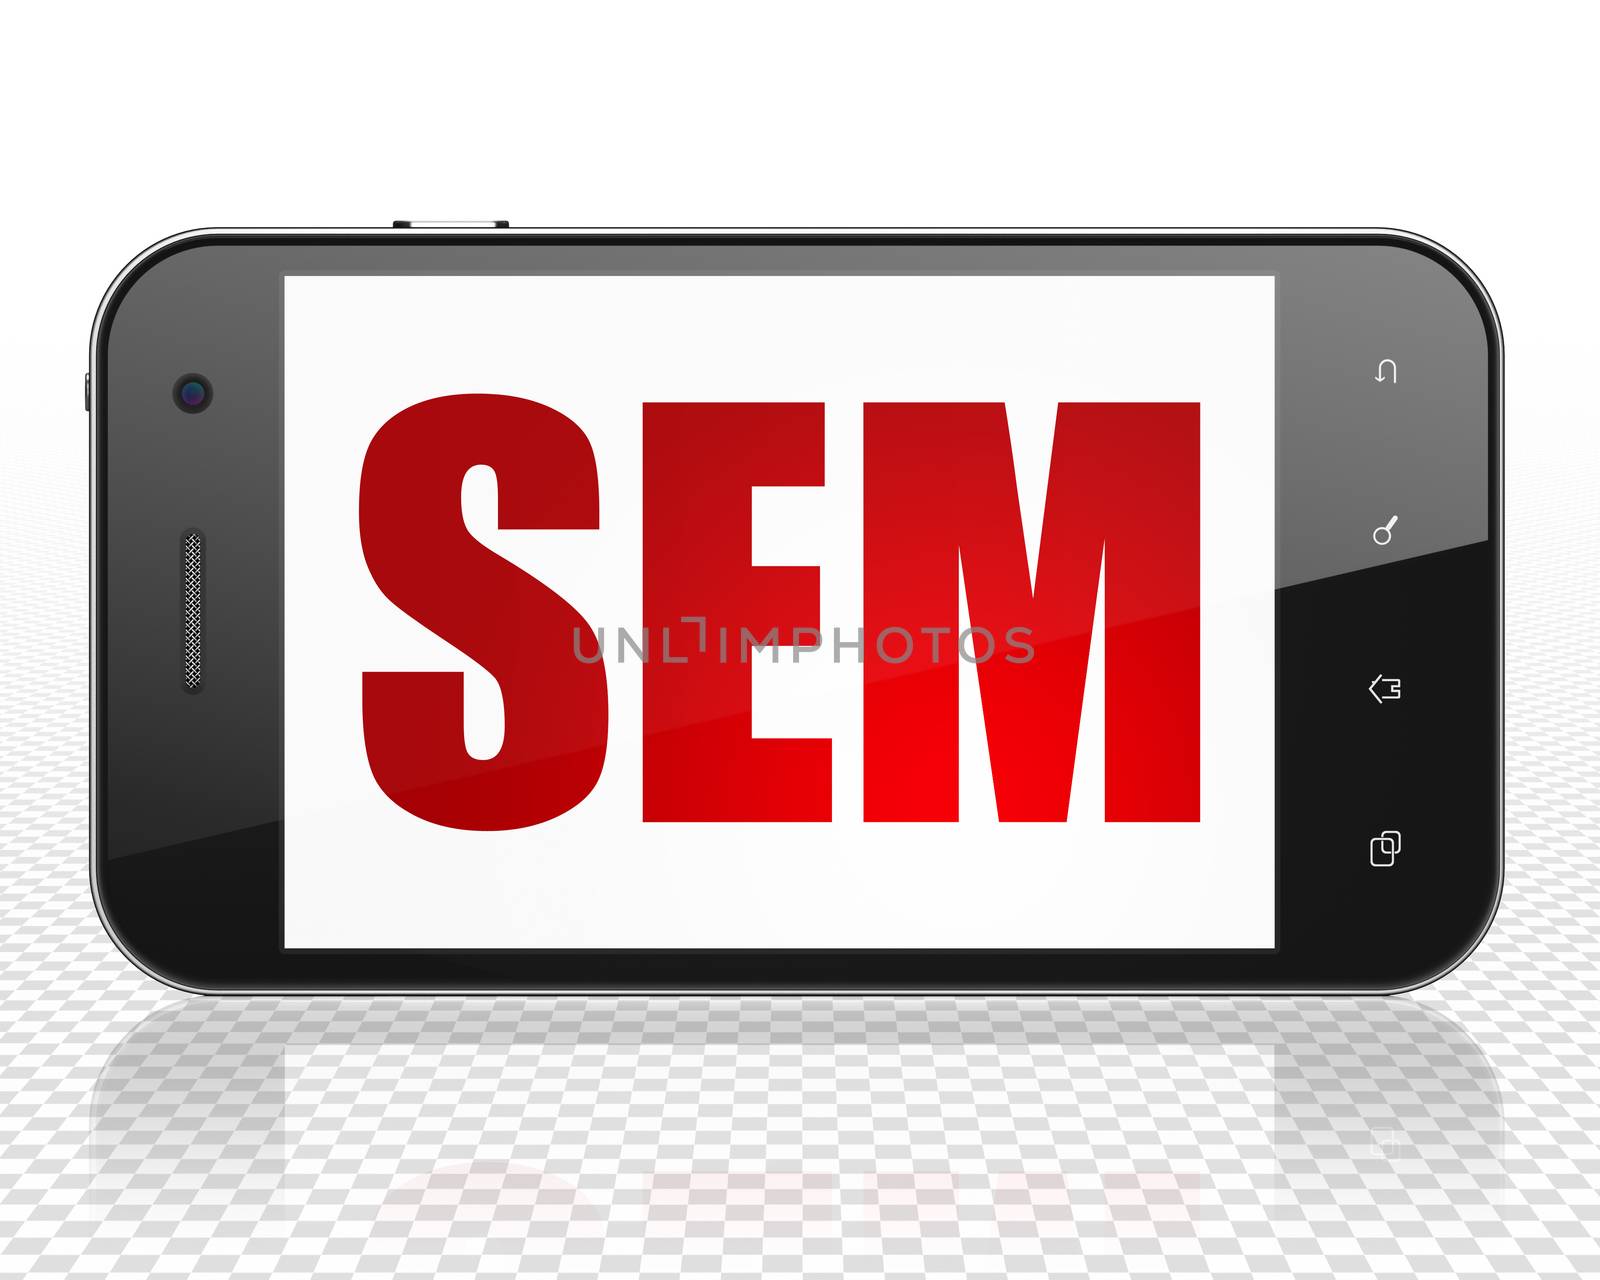 Advertising concept: Smartphone with red text SEM on display, 3D rendering